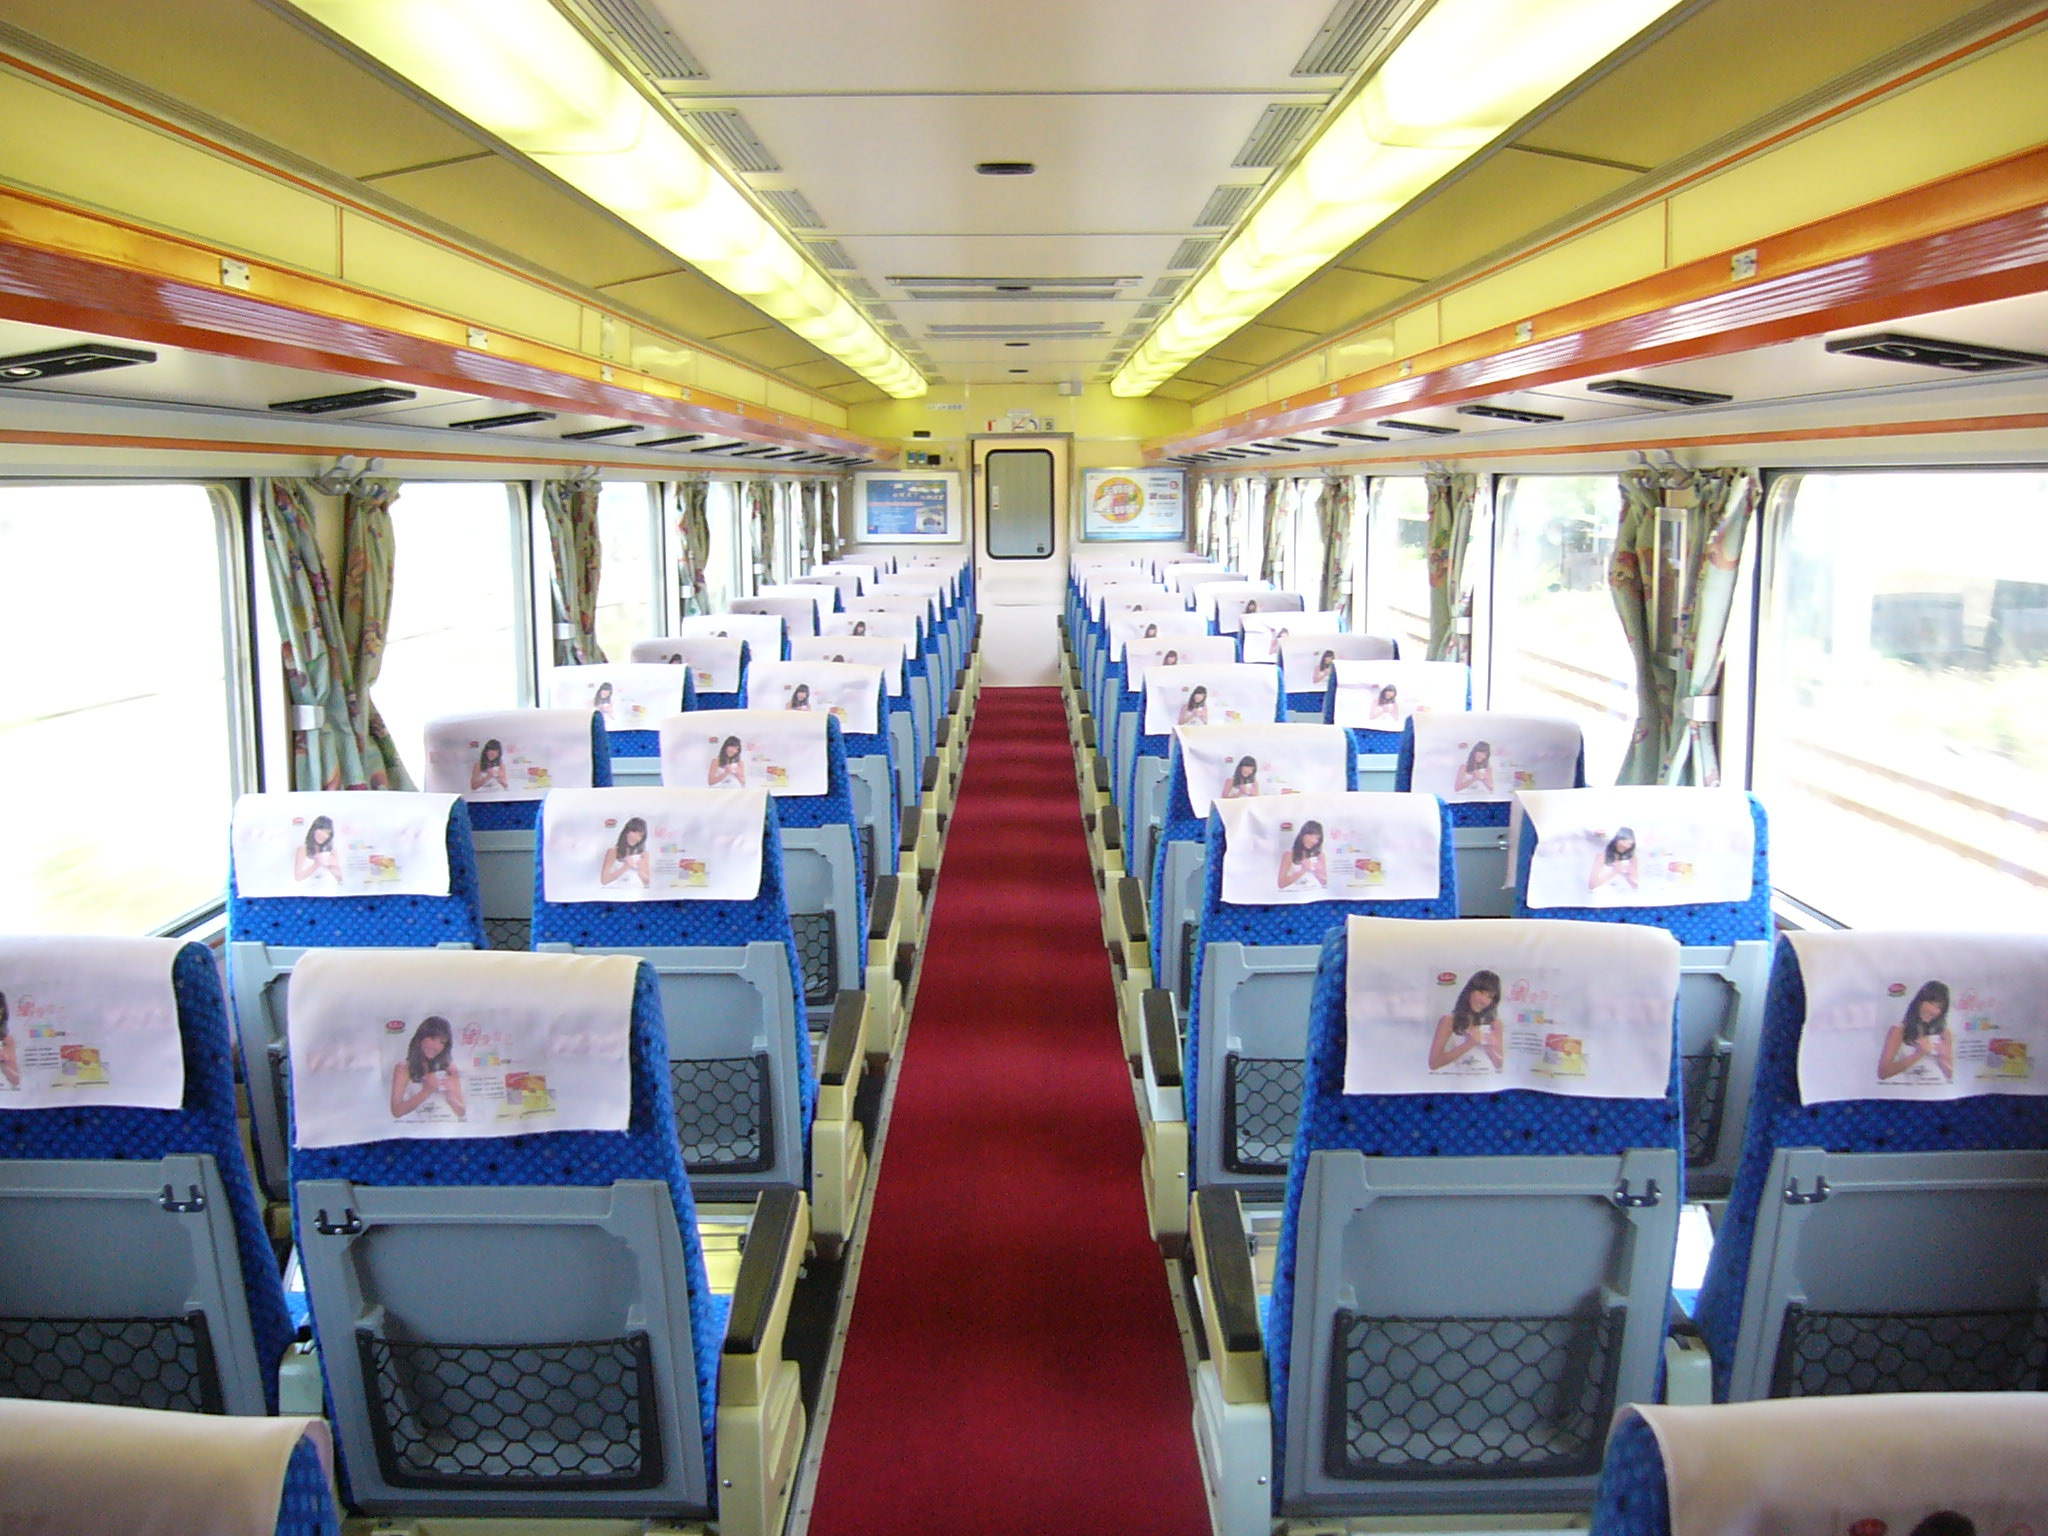 File Inside Of Tra Emu300 Passenger Car With Auto Doors Jpg Wikimedia Commons